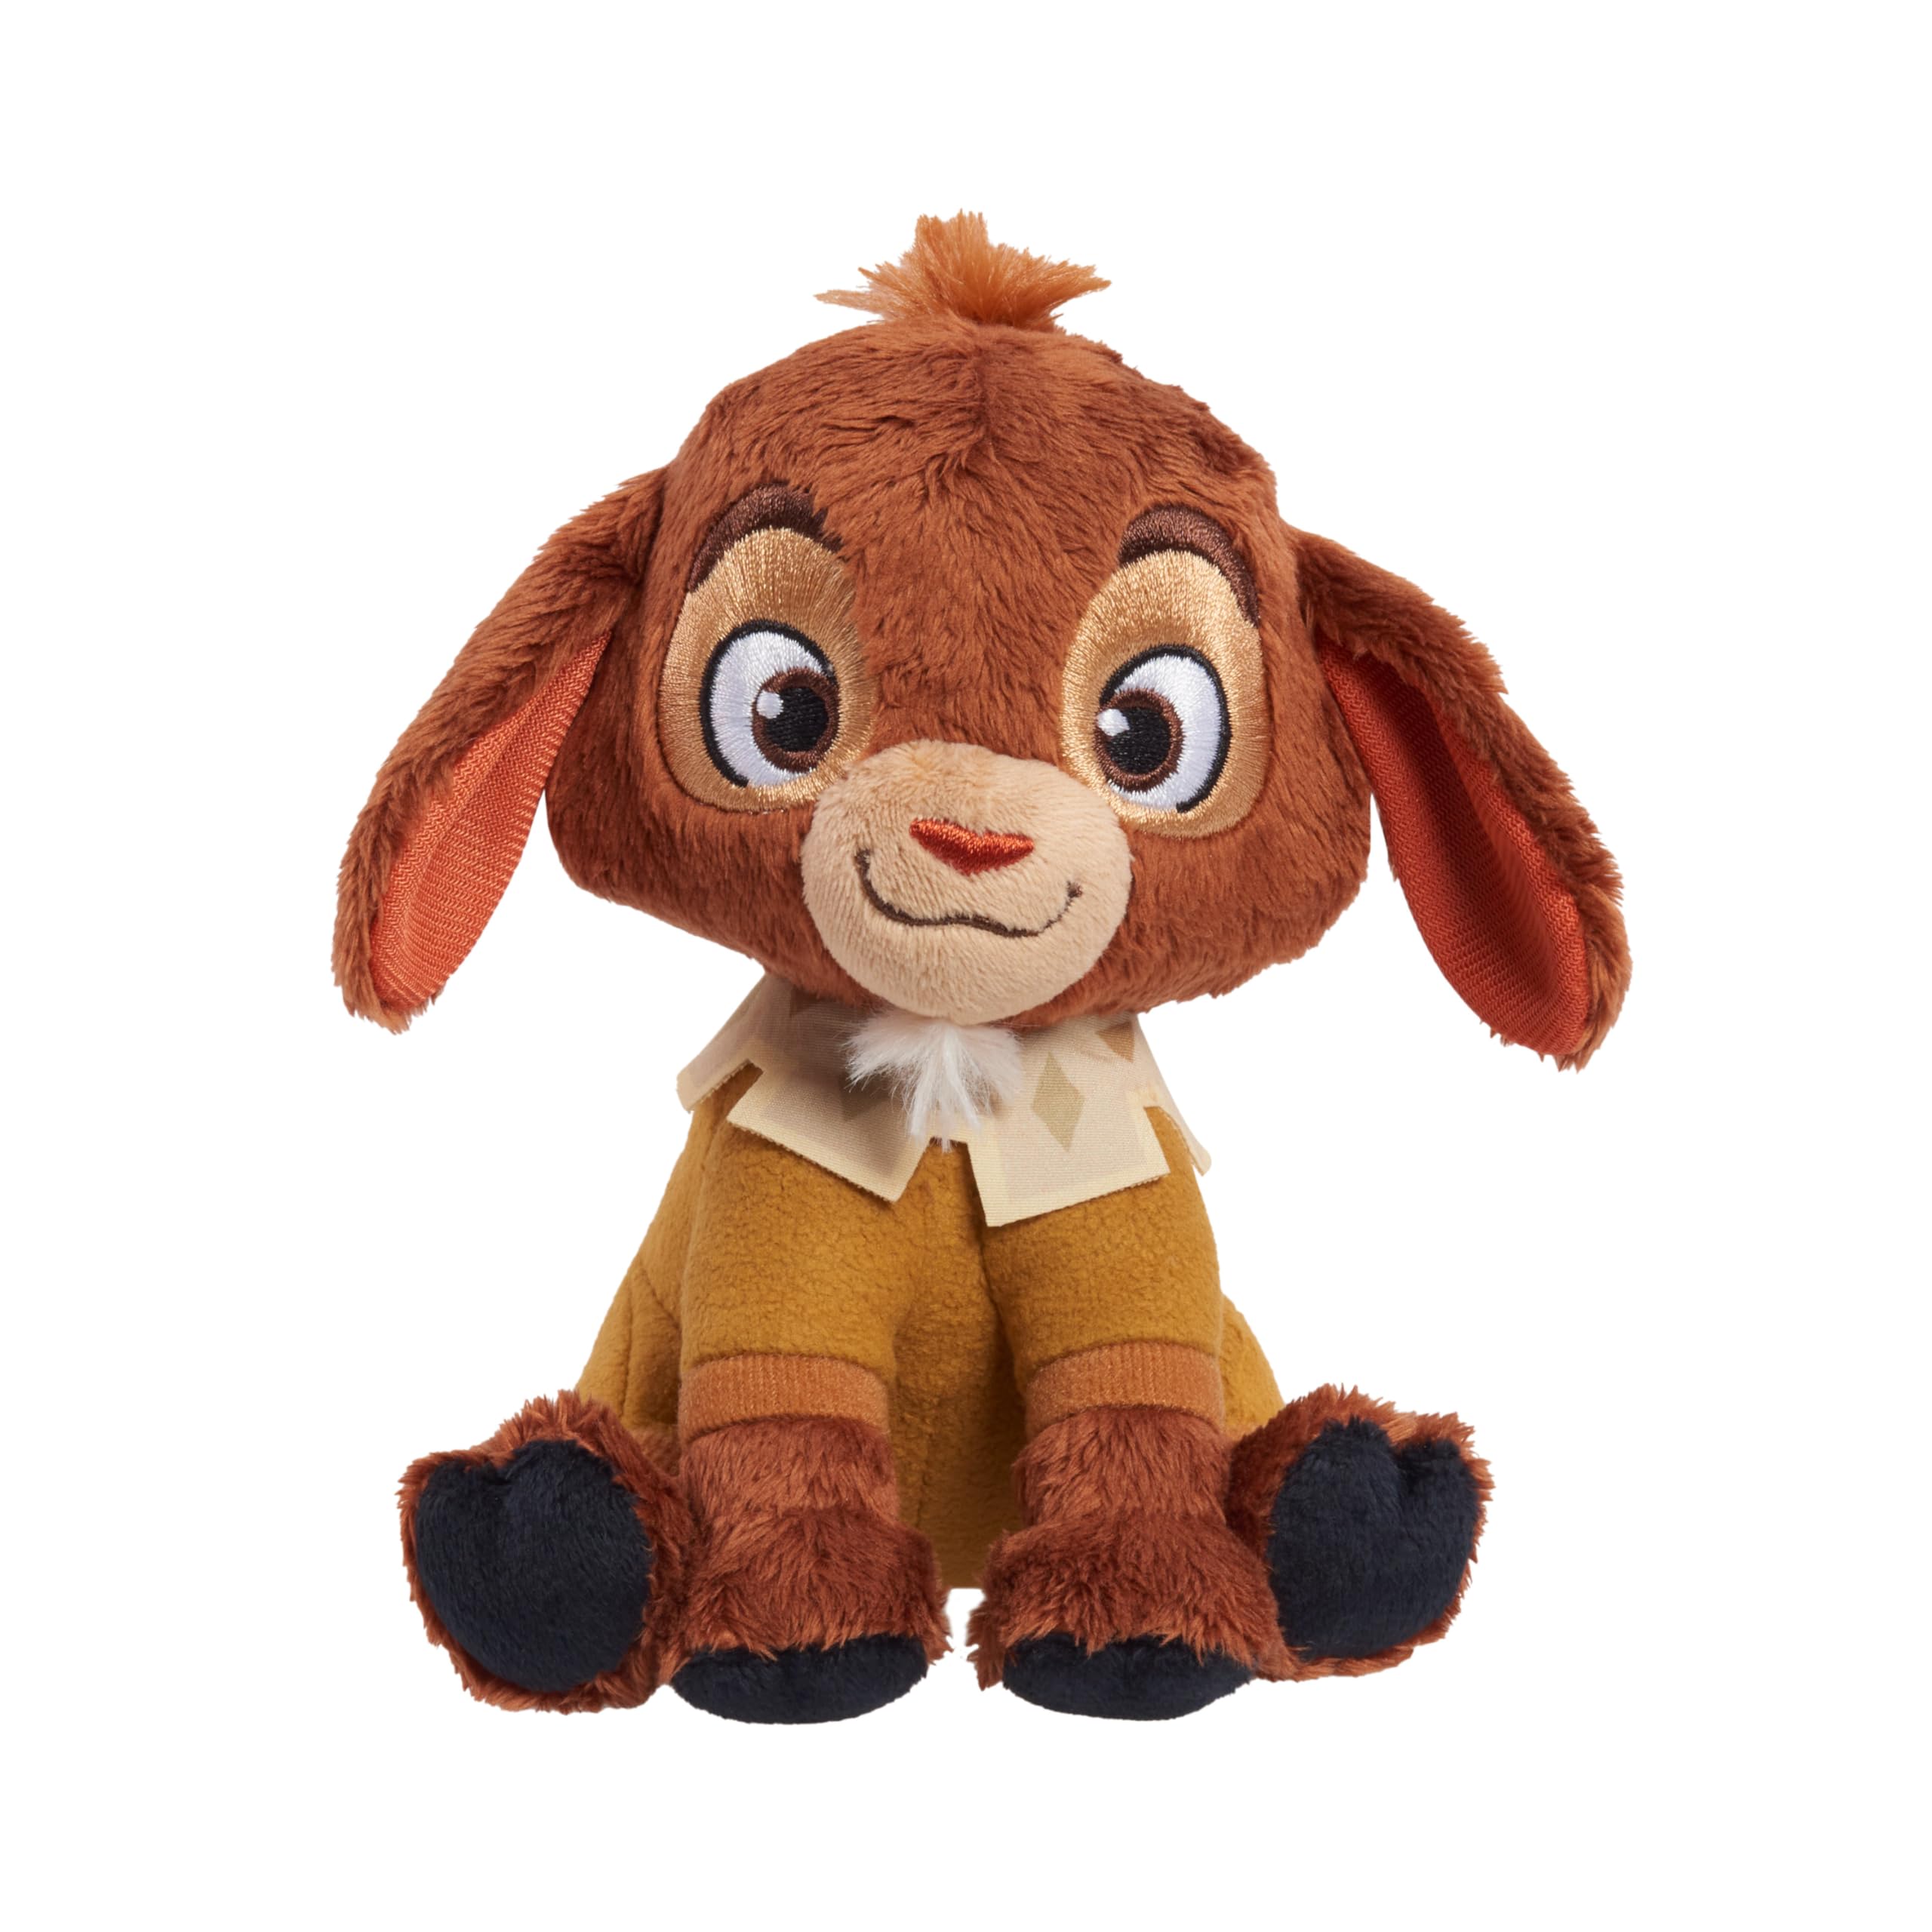 Disney Wish Talking Plush Valentino, Officially Licensed Kids Toys for Ages 2 Up by Just Play